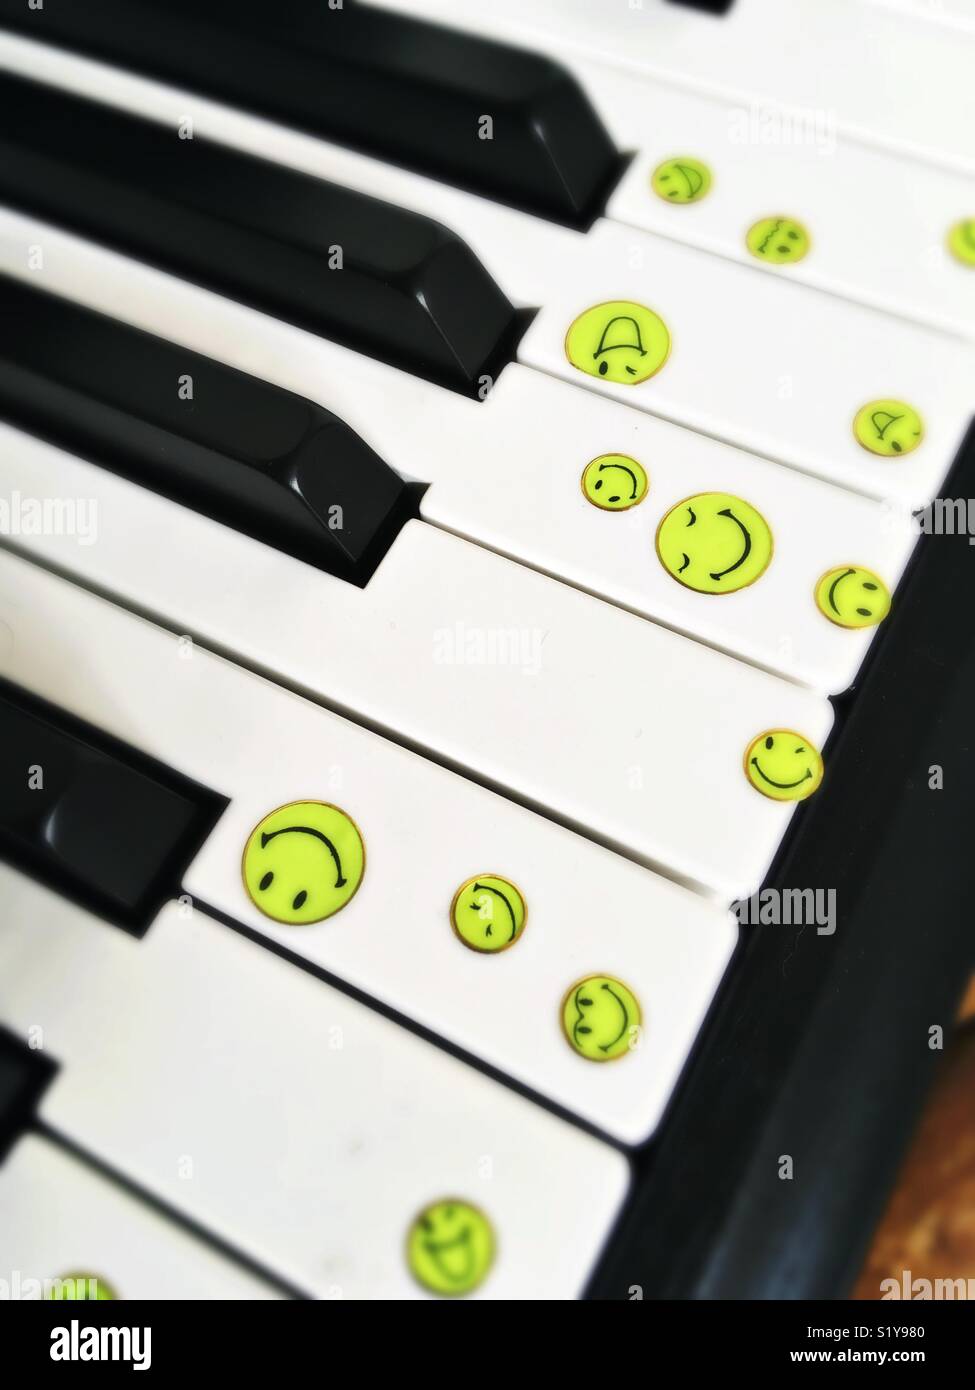 Piano keys with smiley faces Stock Photo - Alamy